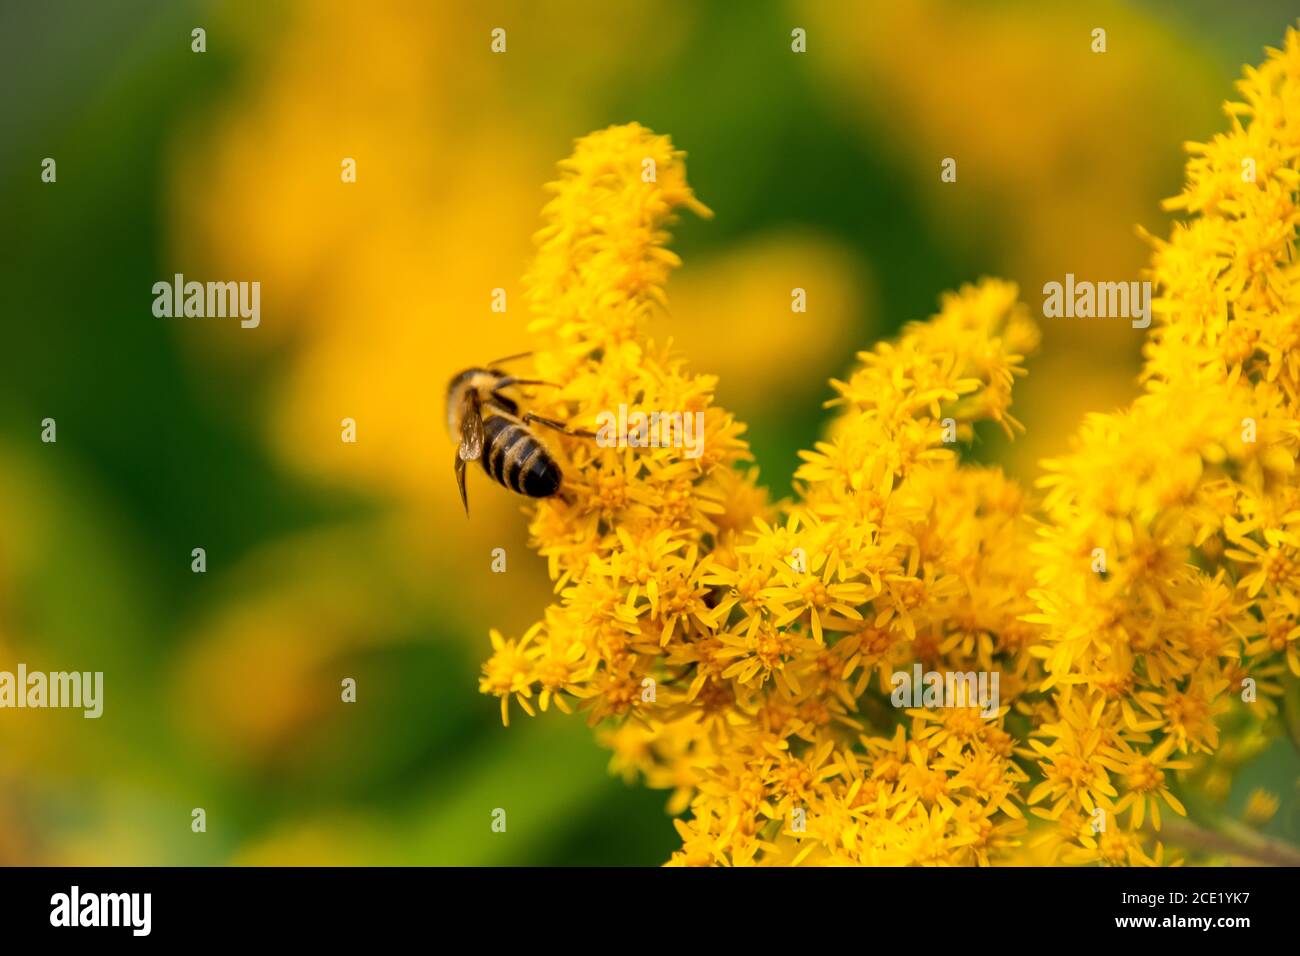 Worker bee collects nectar from a Goldenrod wildflower. Honey Bee over the yellow flower in blur background. Late bloomers. Solidago gigantea, Stock Photo